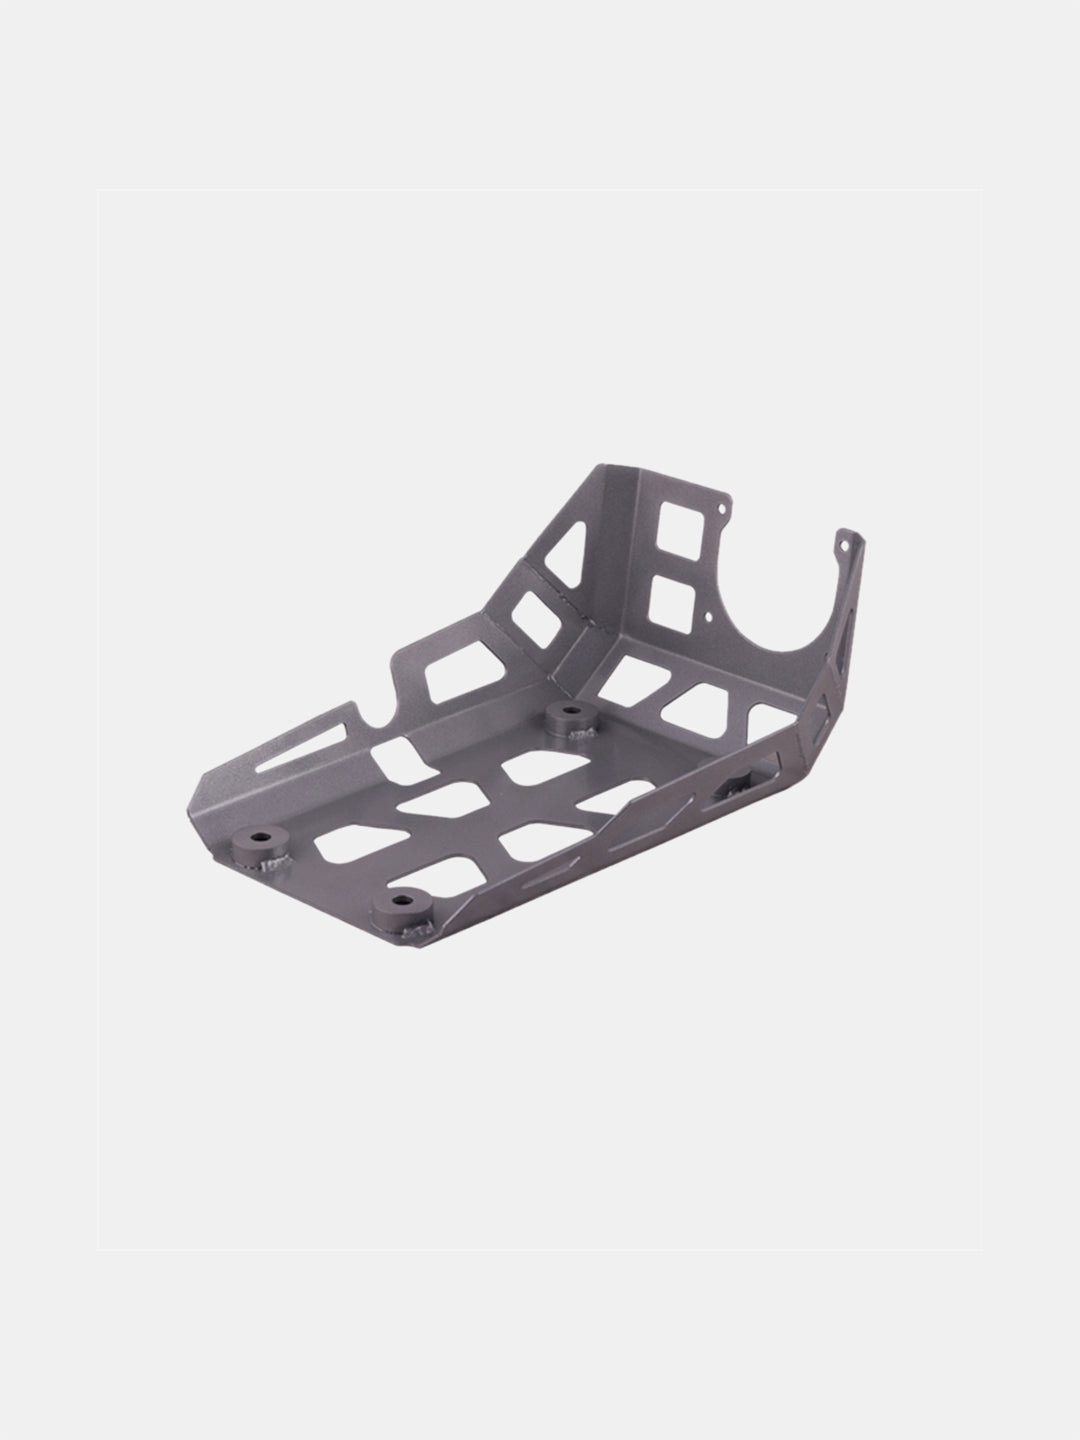 Bash Plate For BMW G 310GS